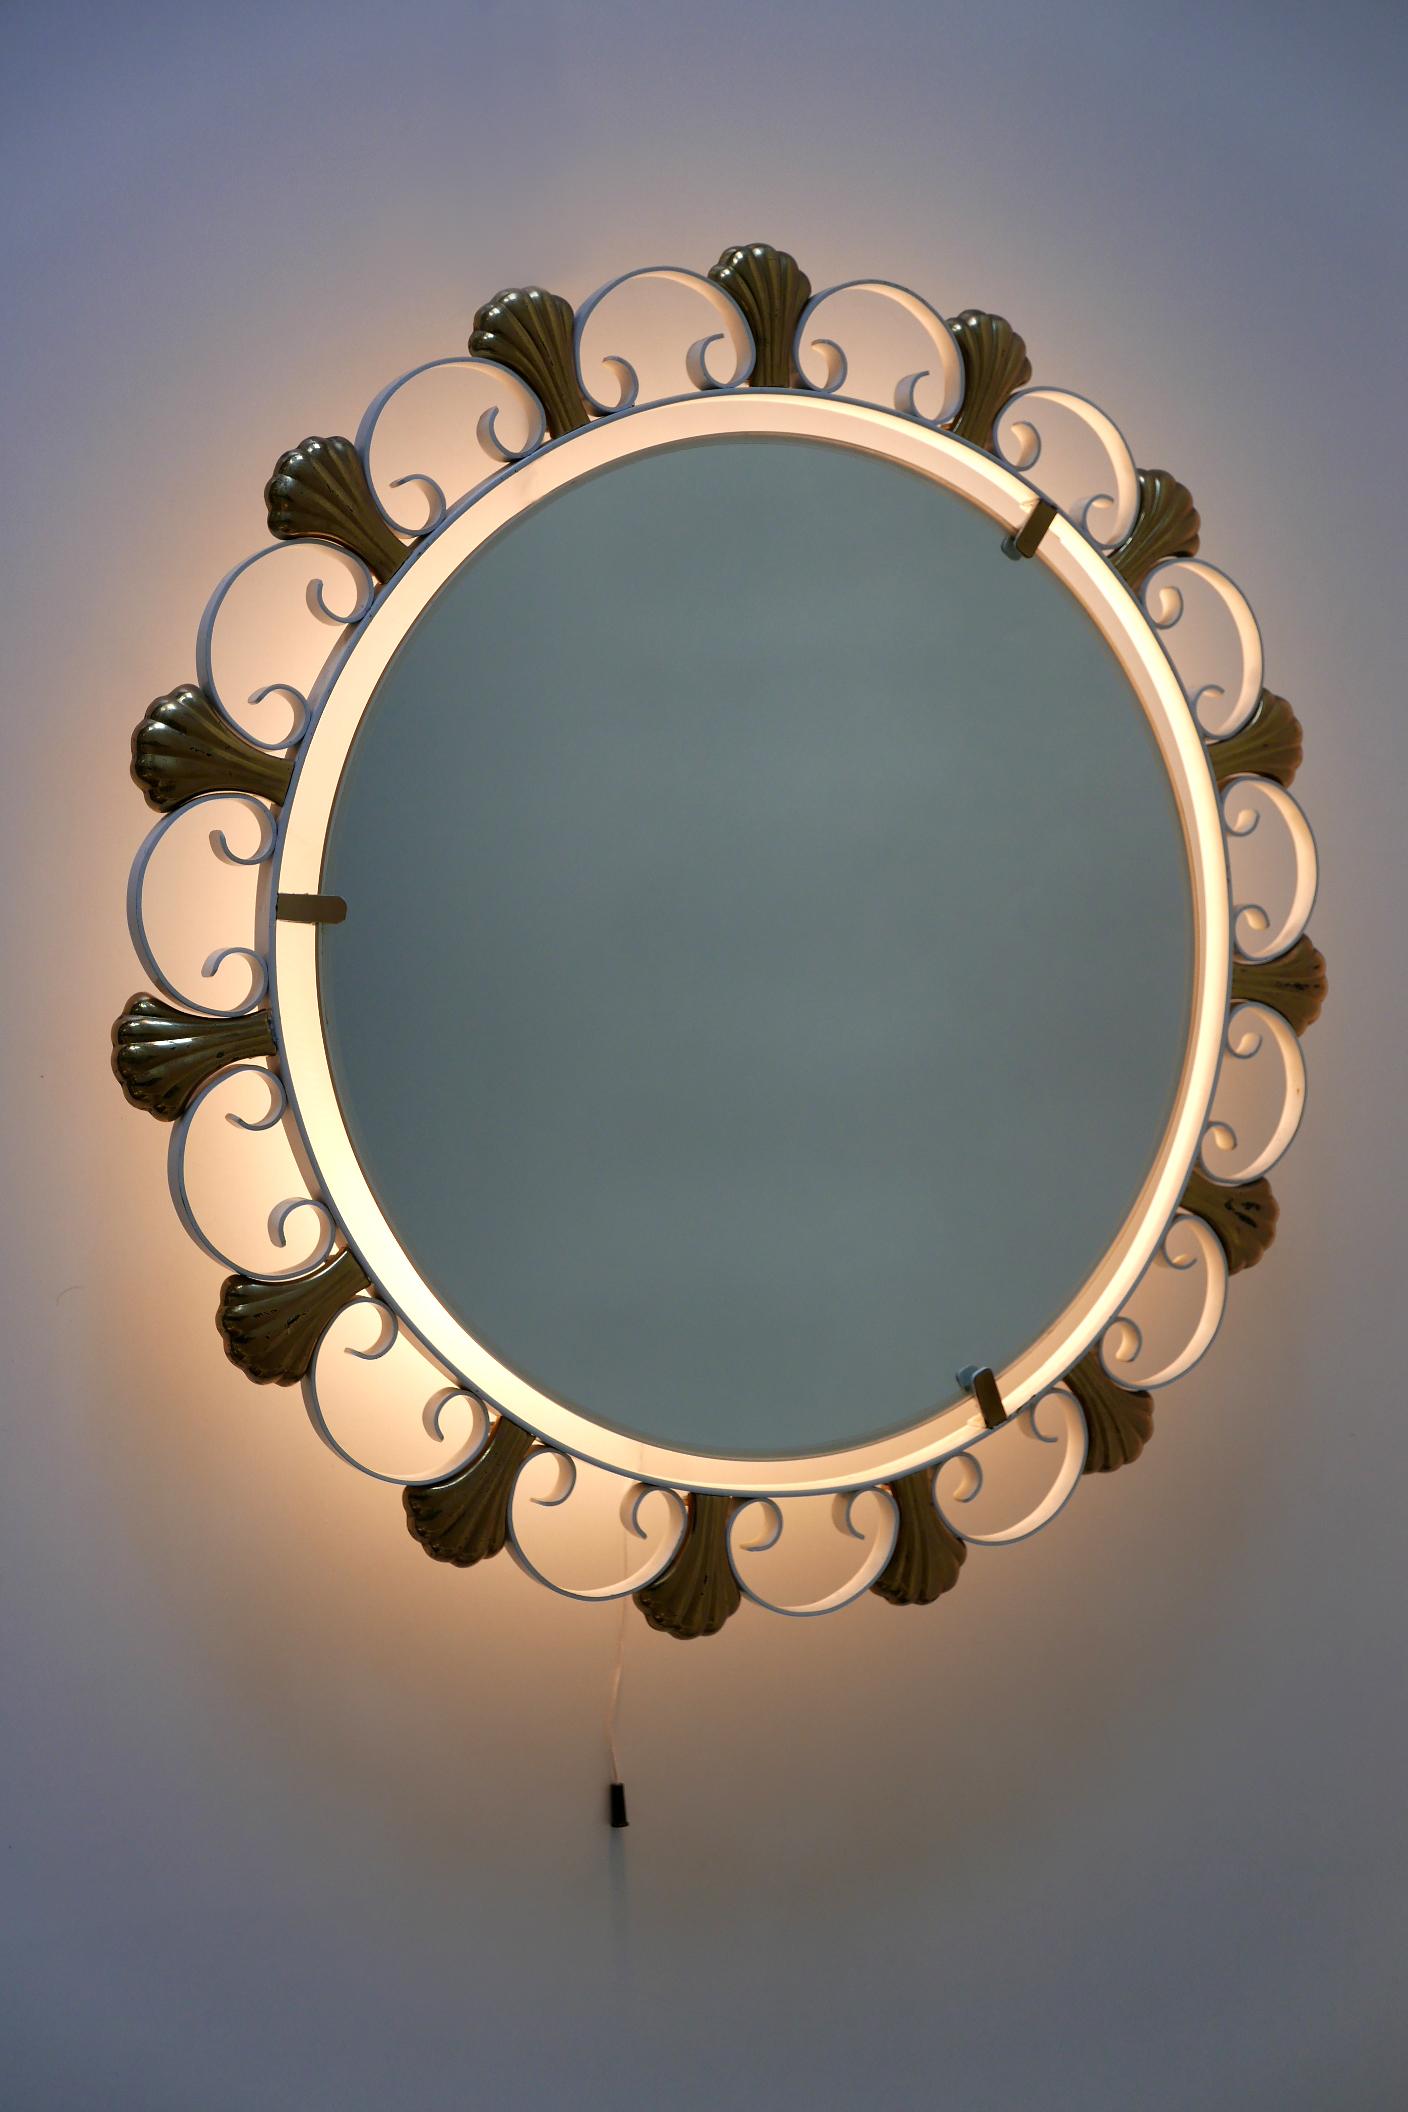 Mid-20th Century Elegant Mid-Century Modern Backlit Wall Mirror by Hillebrand, 1960s, Germany For Sale